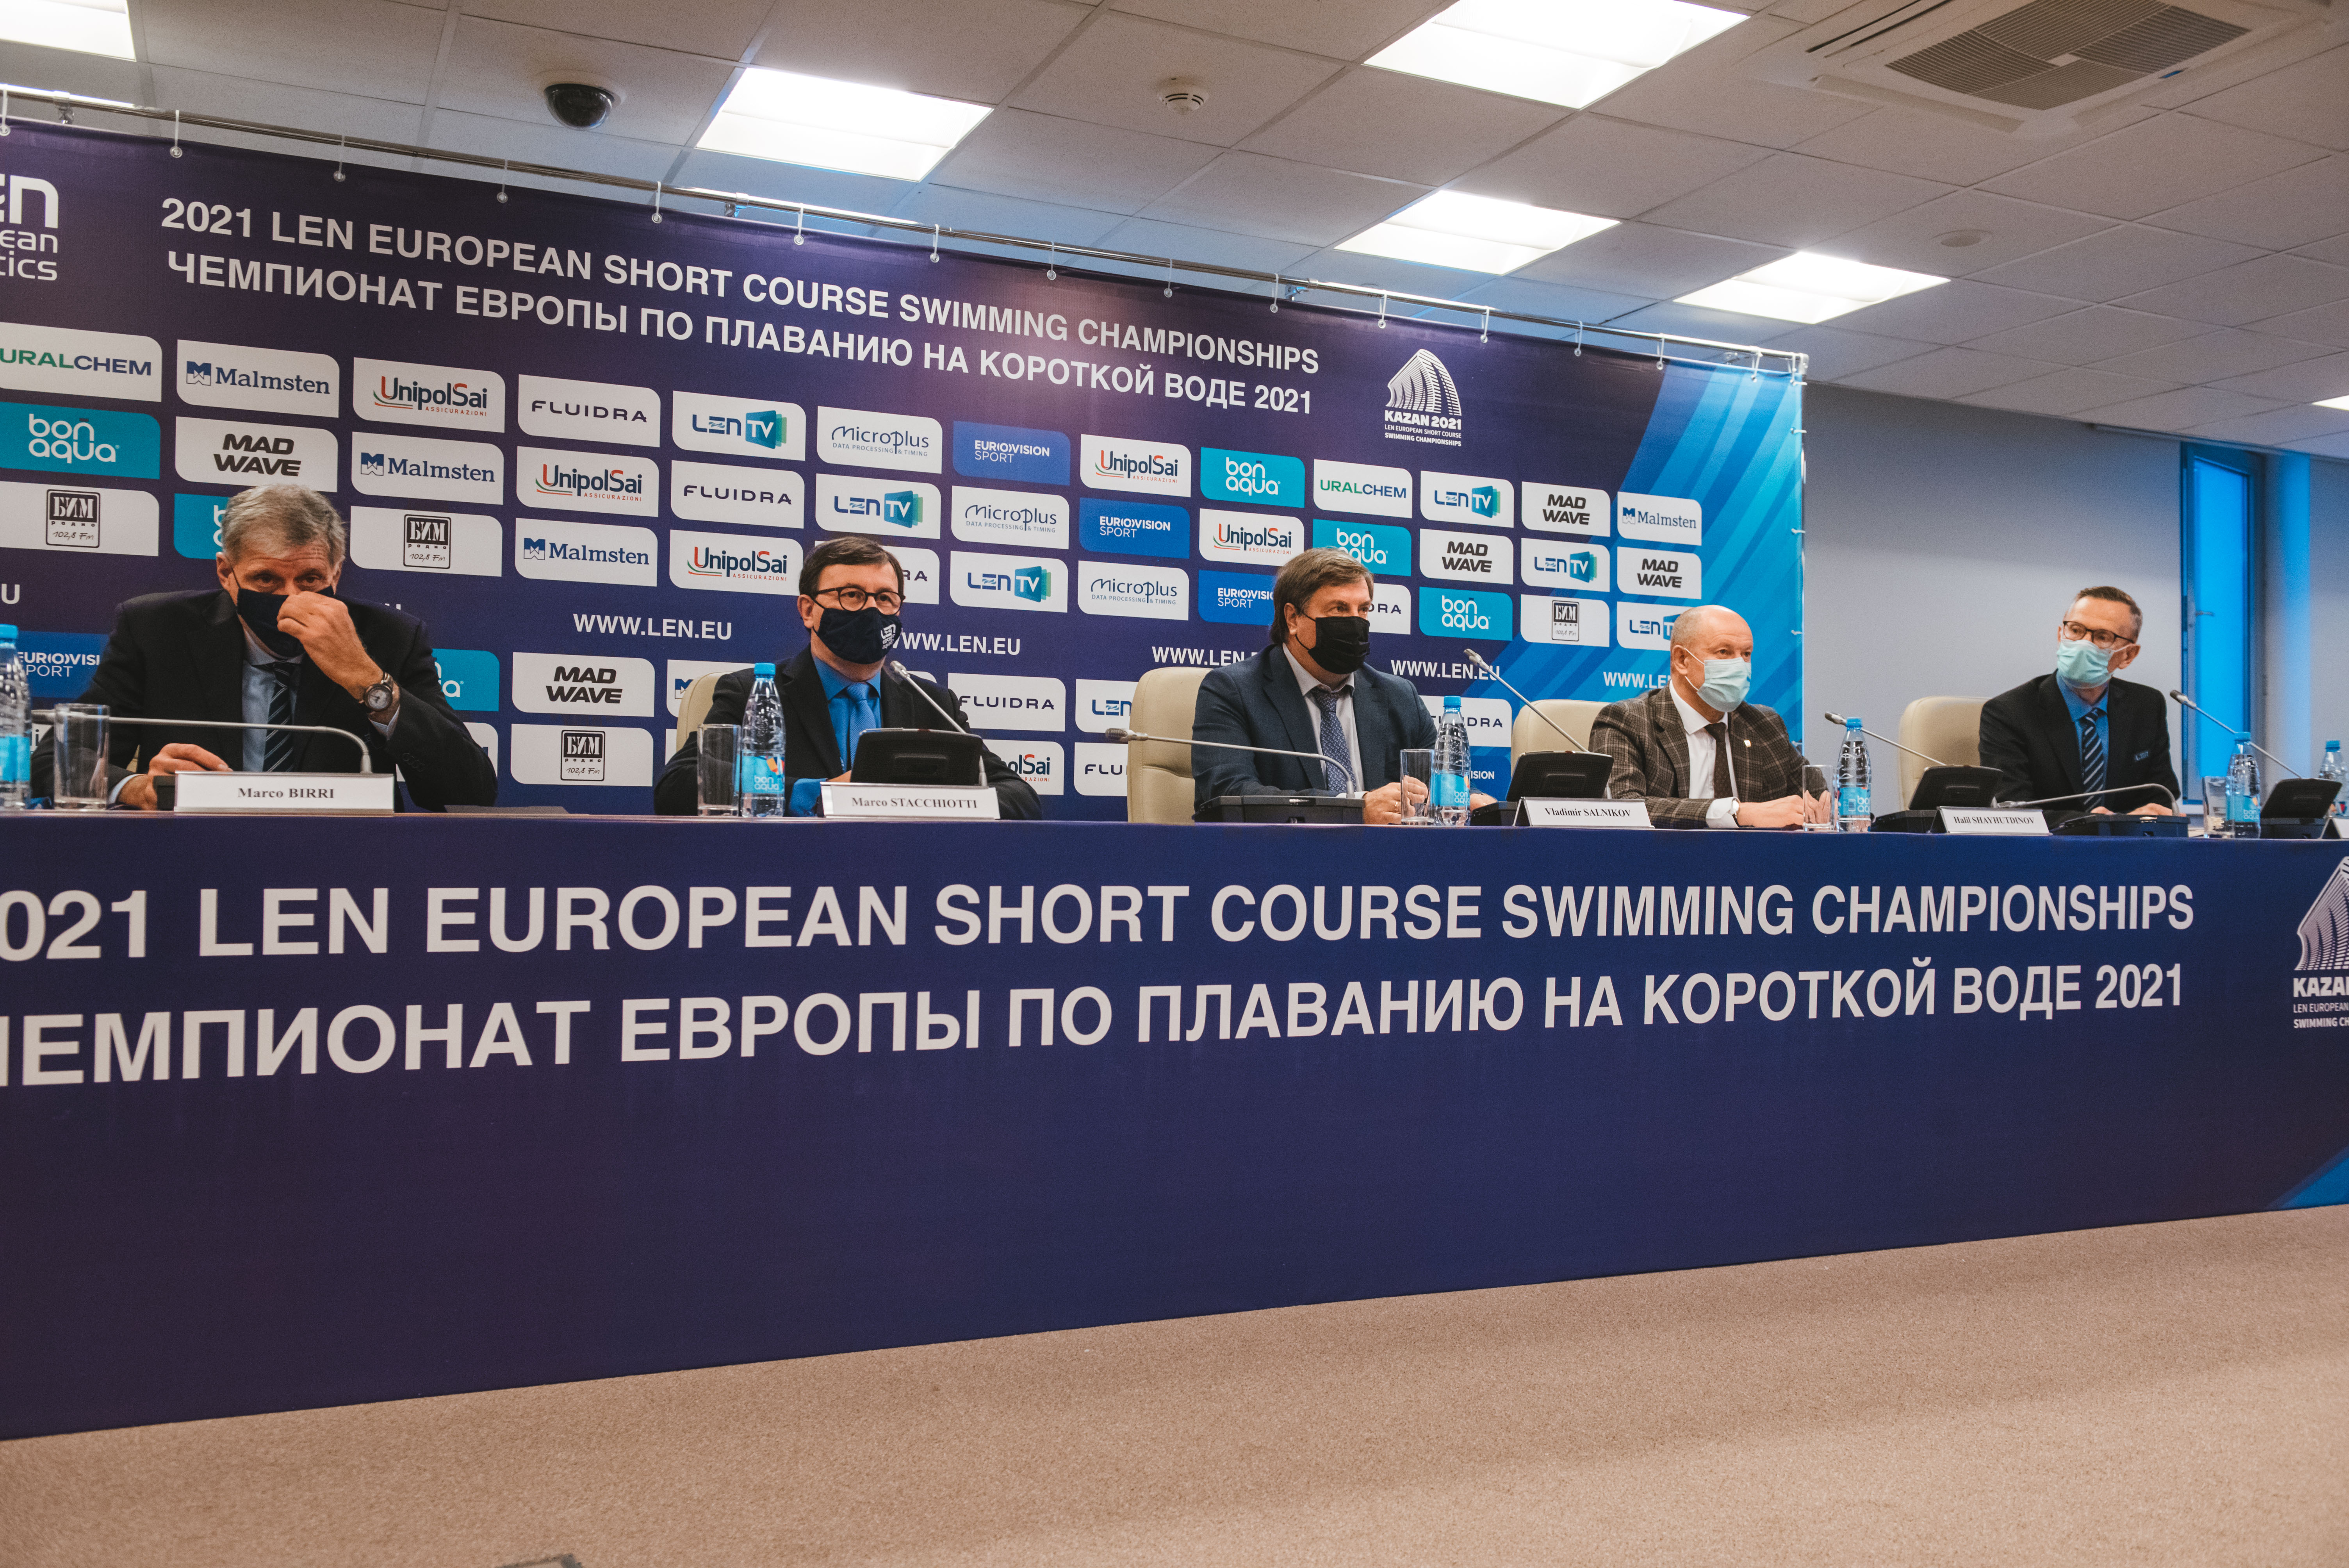 “Results at the European Championships in Kazan will be very good”